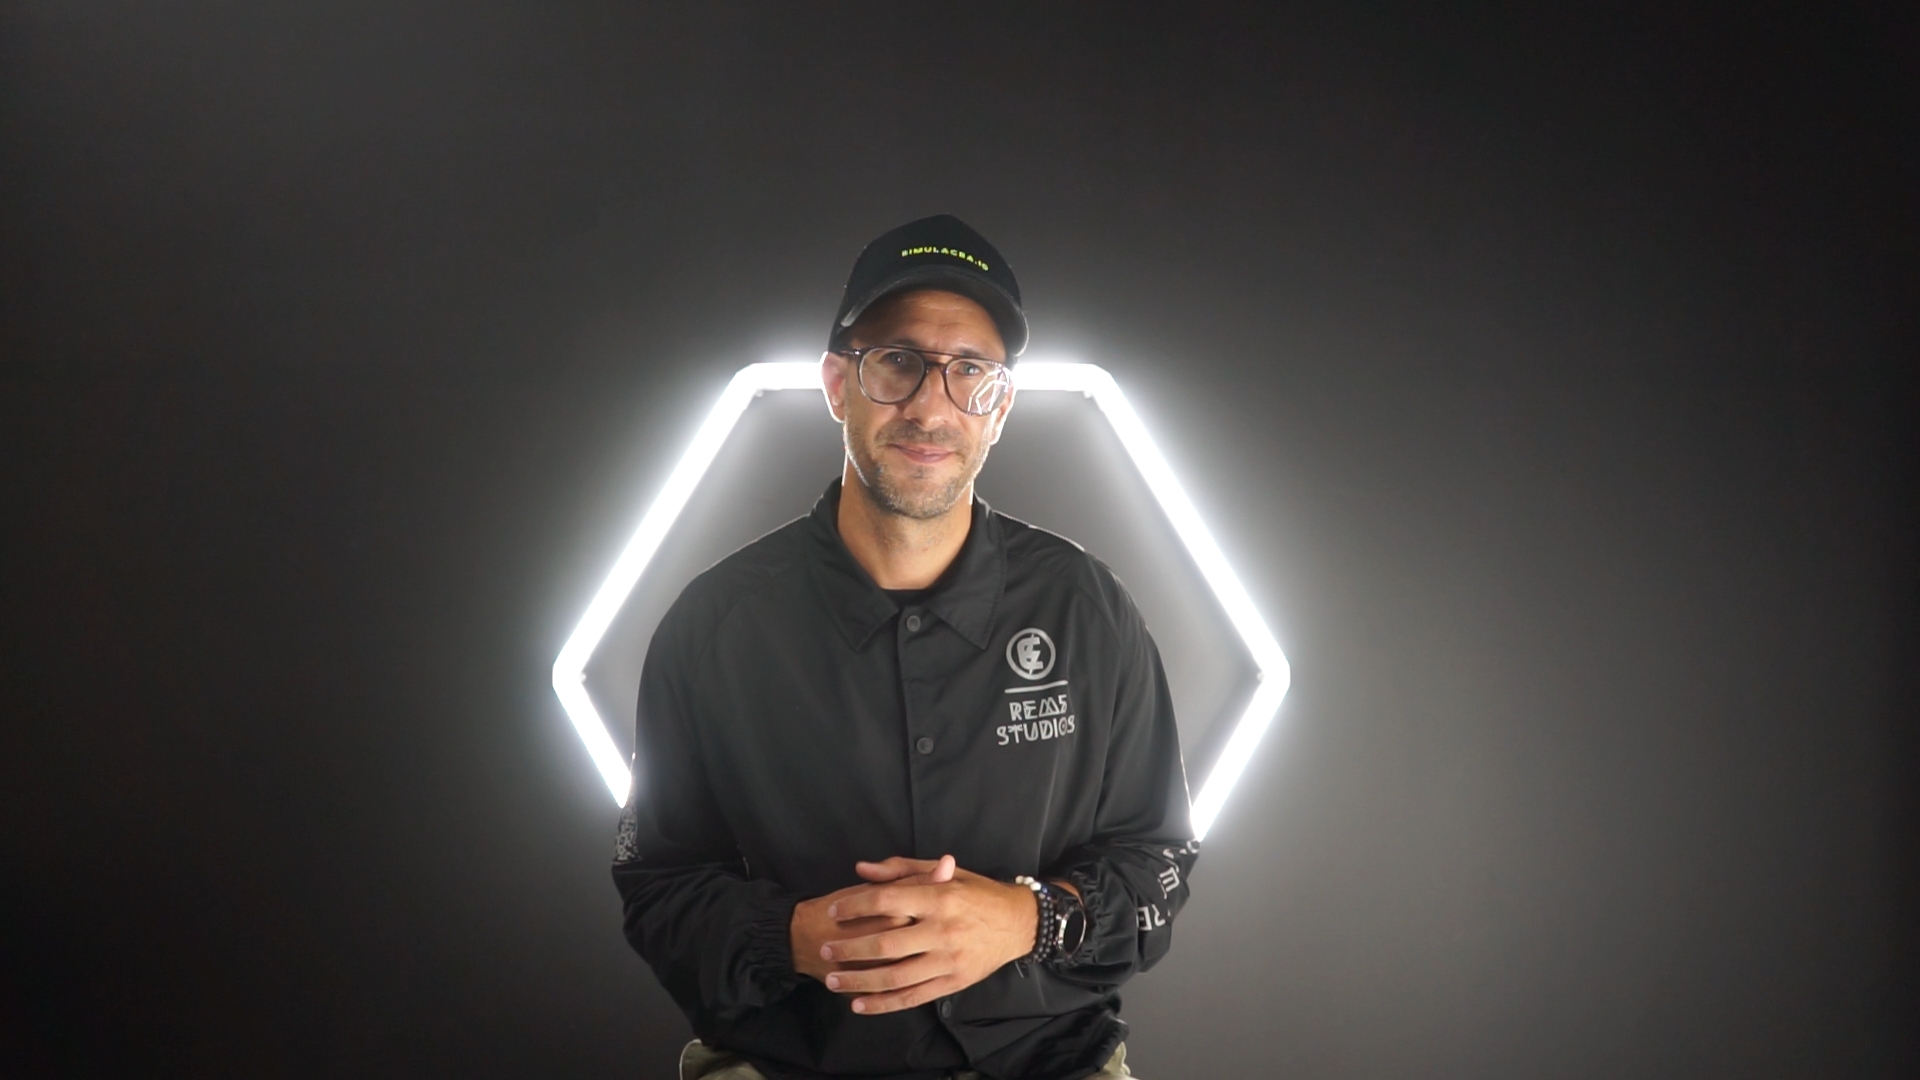 amir berenjian of rem5 vr labs standing in front of black background with neon light